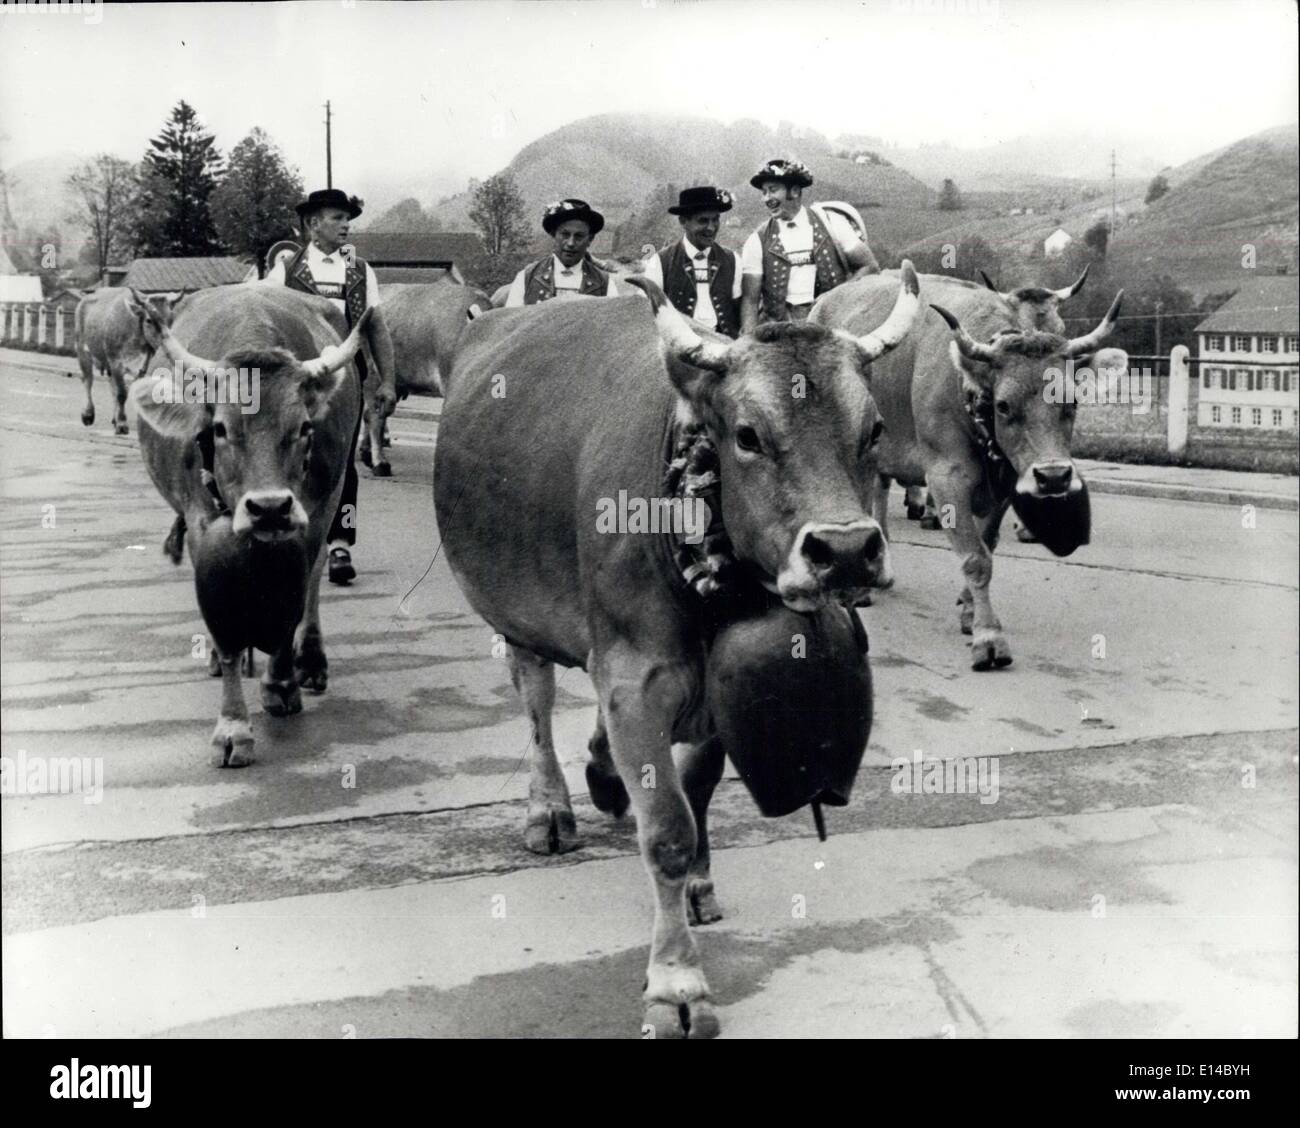 Apr. 17, 2012 - An old Swiss tradition. Every Spring an old tradition takes place in Switzerland when farmers bring their cows to the mountains. The farmers wear traditional clothes and the cows wear large bells round their necks. Stock Photo